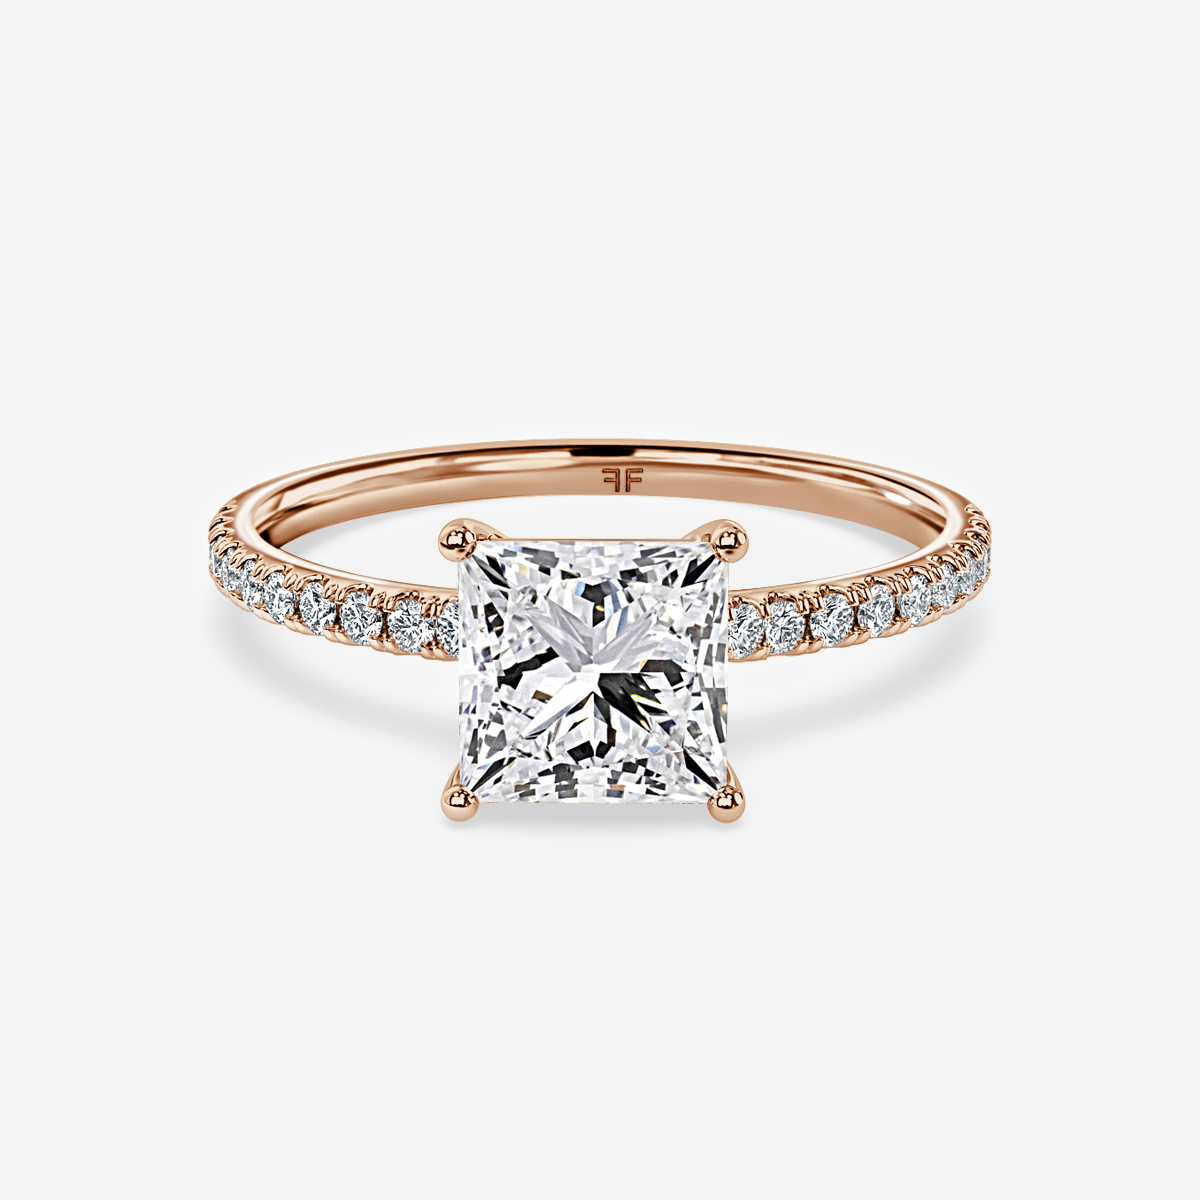 Jessica Rose Gold Pave Engagement Ring